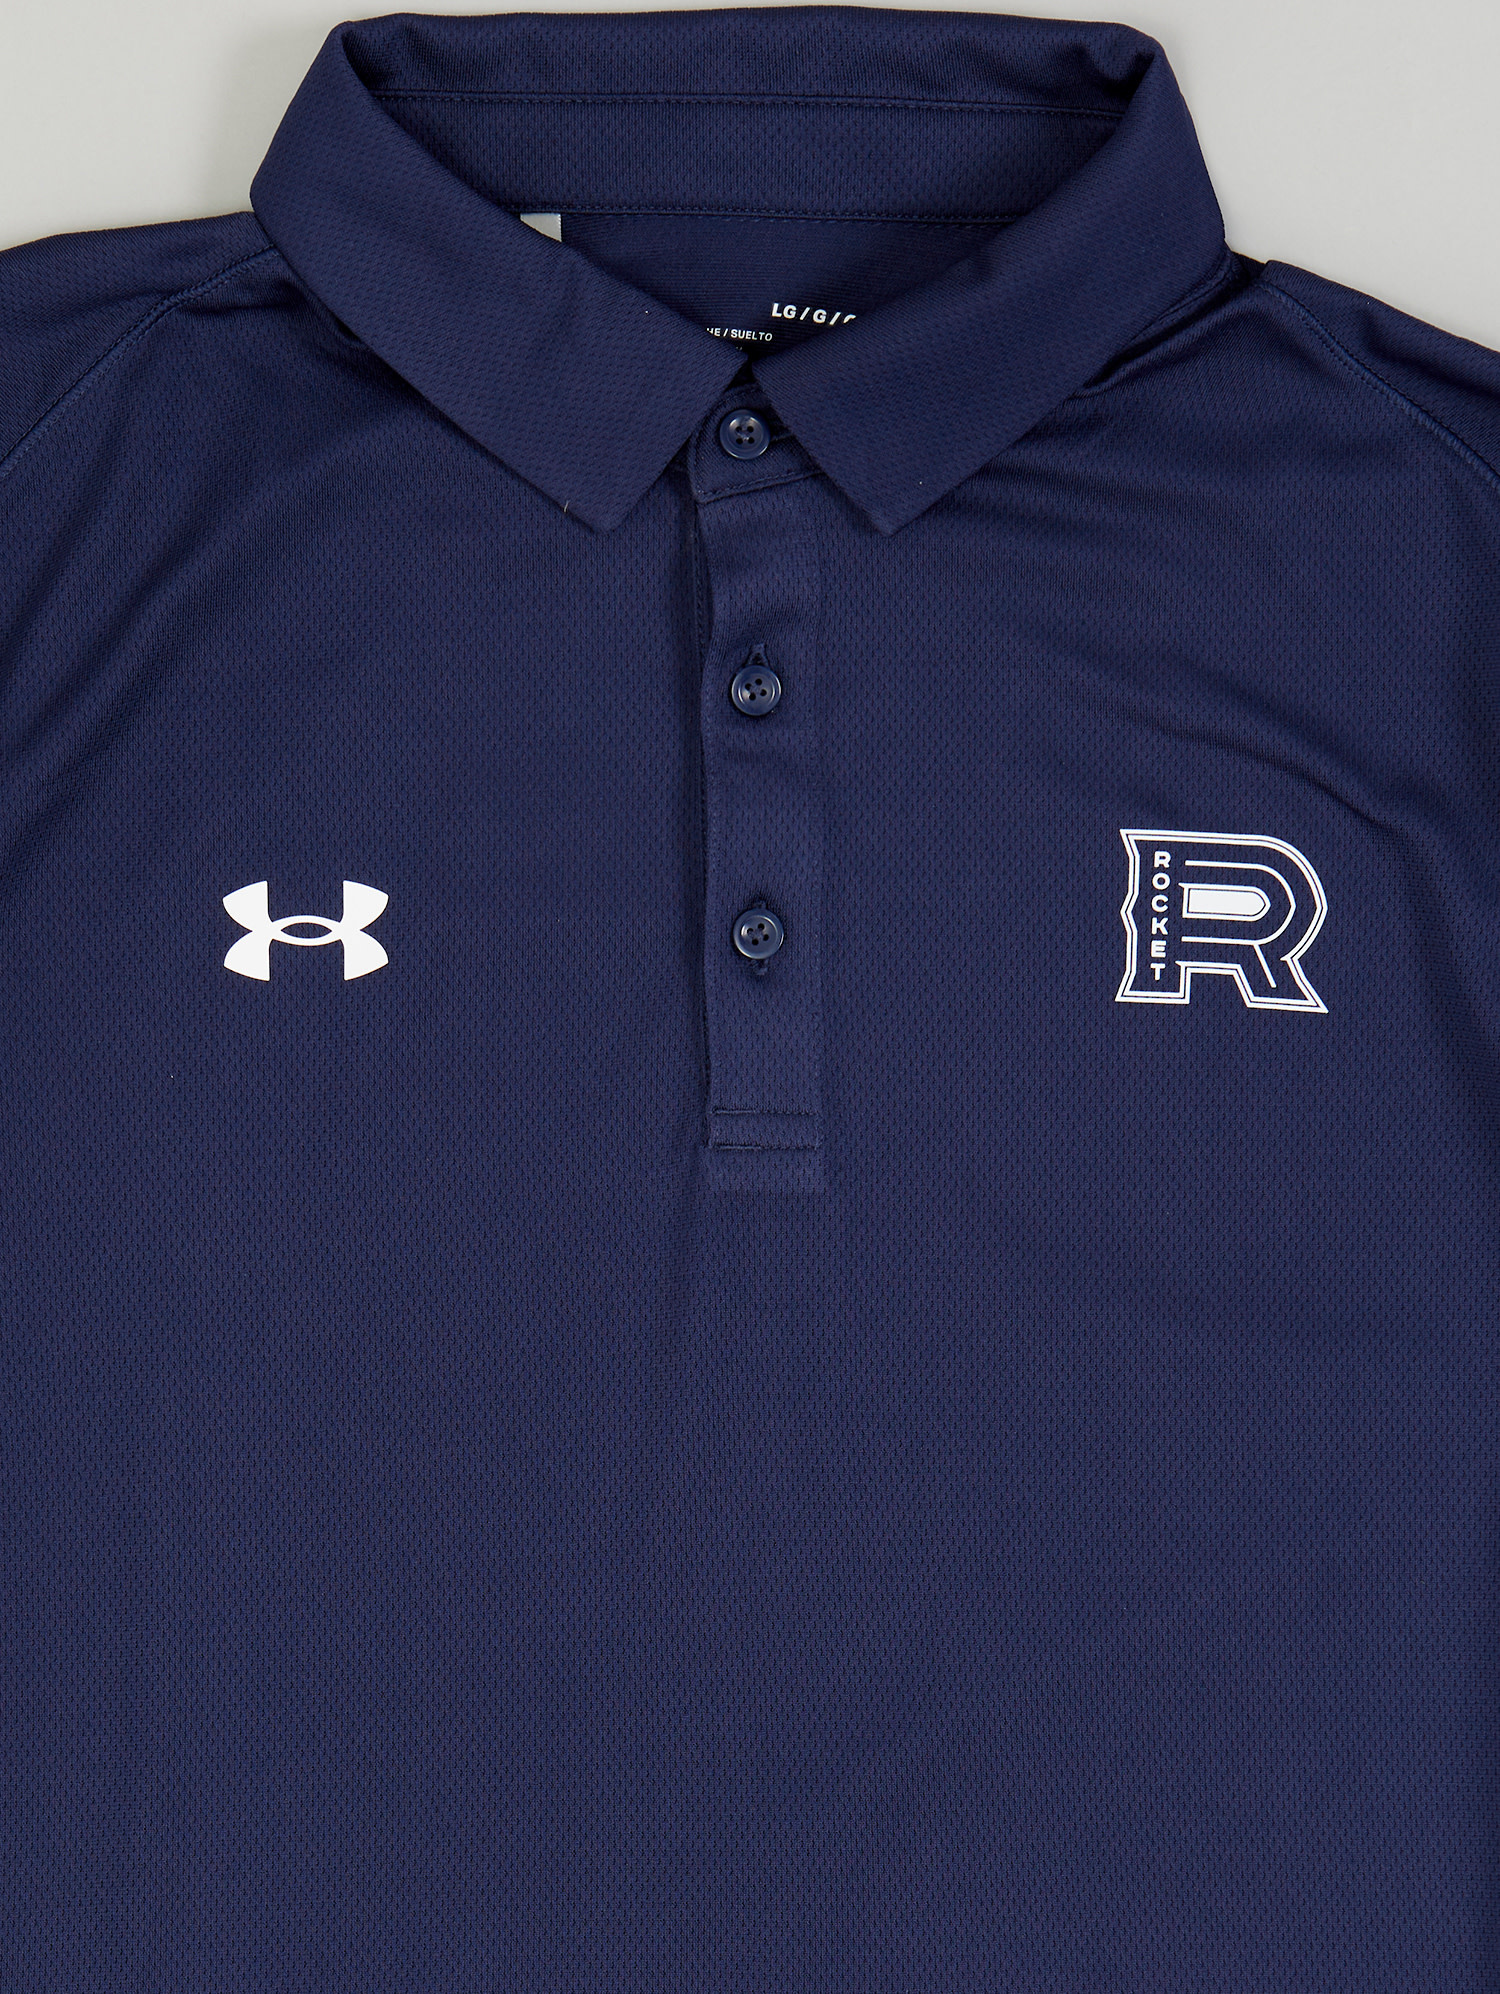 Laval Rocket Under Armour Navy Blue Polo - Tricolore Sports